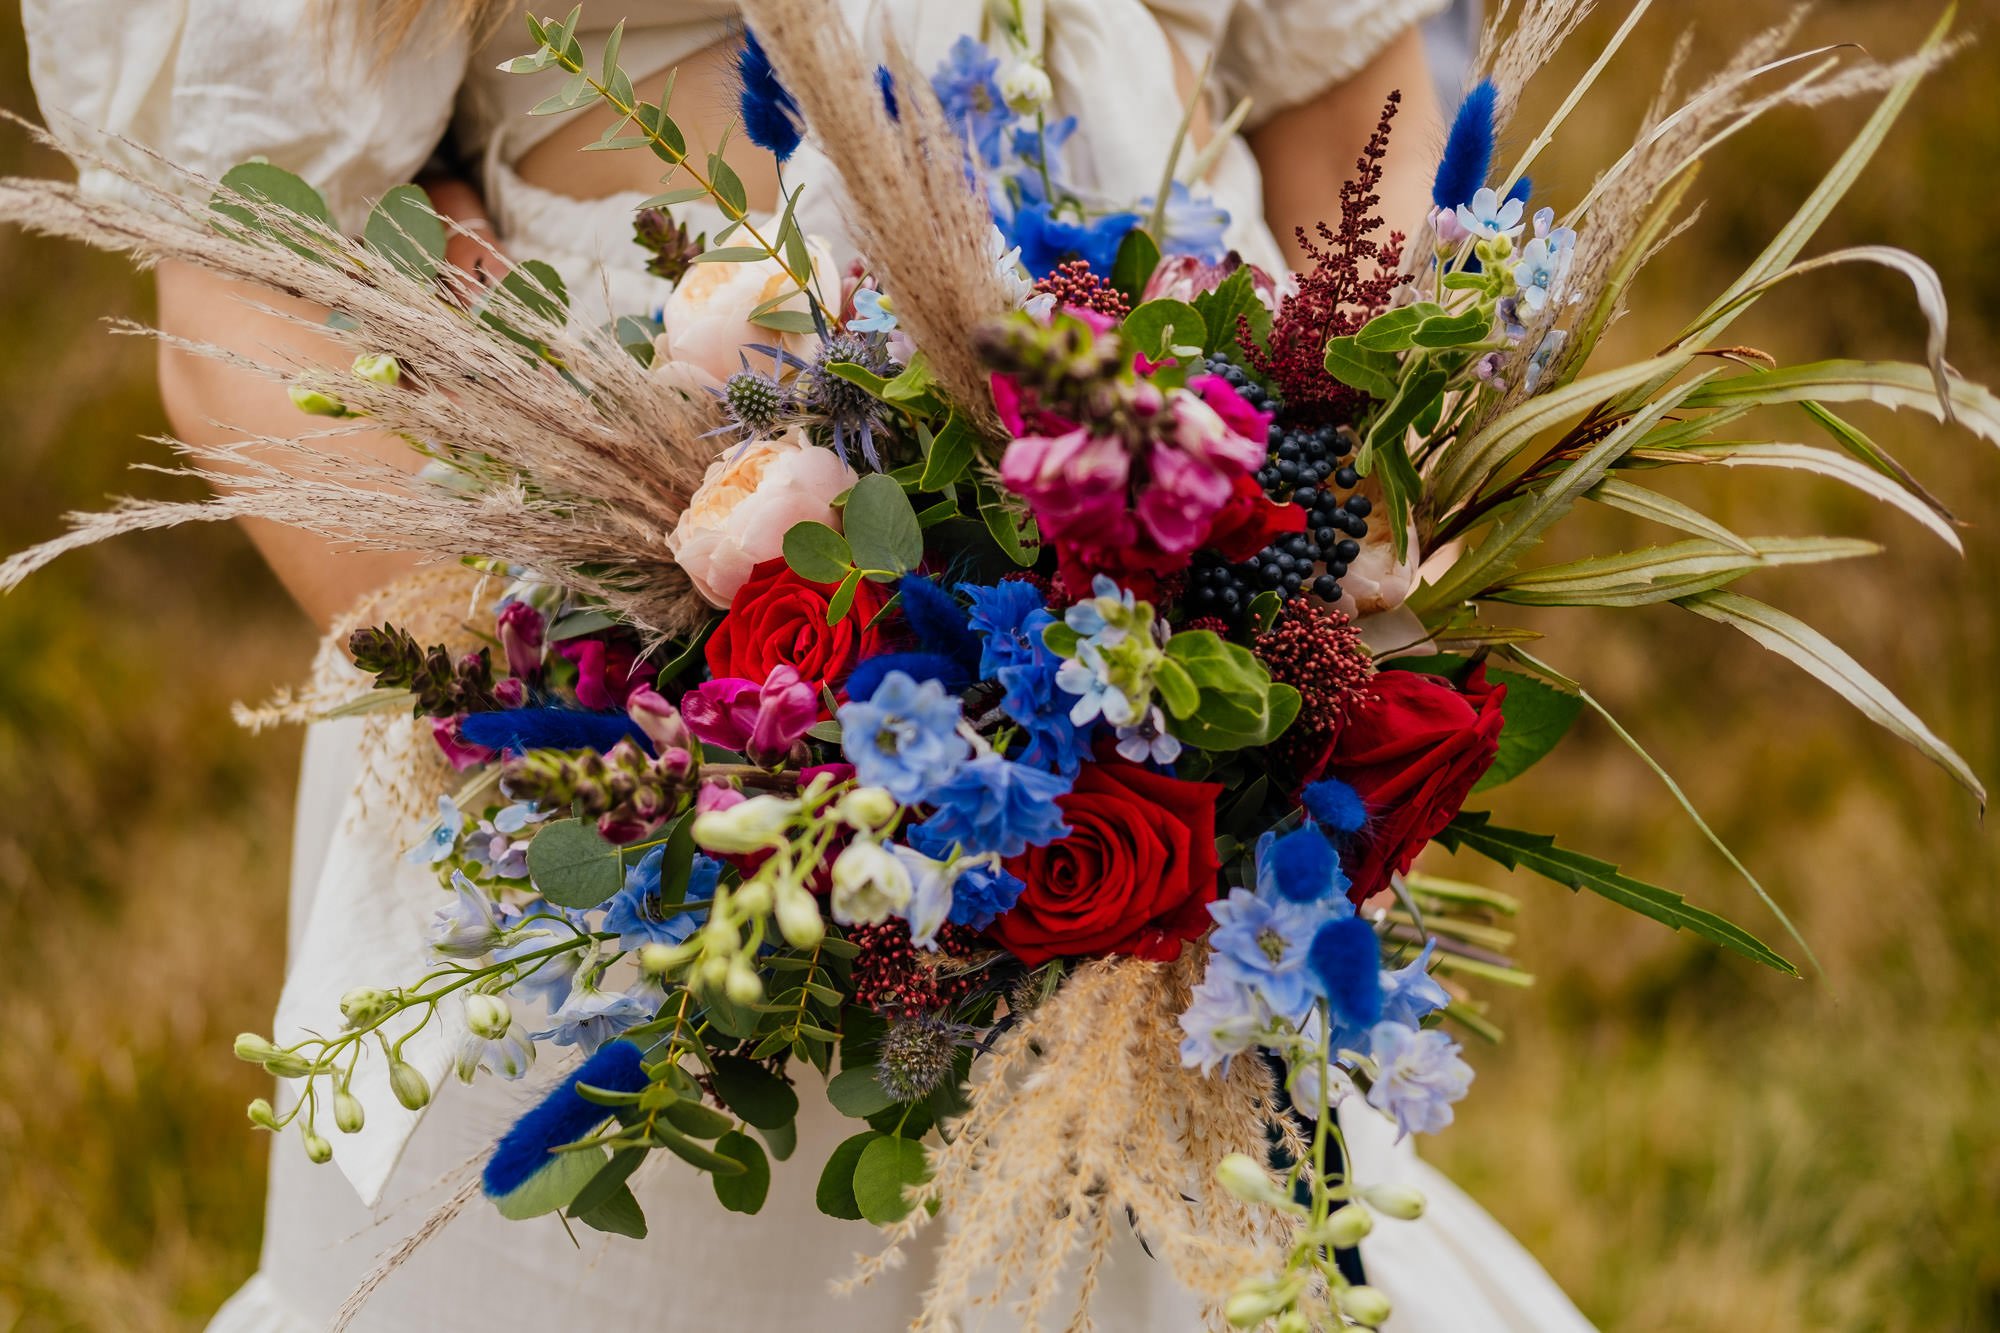 Colourful Bouquet Ideas and Unique Inspiration for Your Wedding Flowers